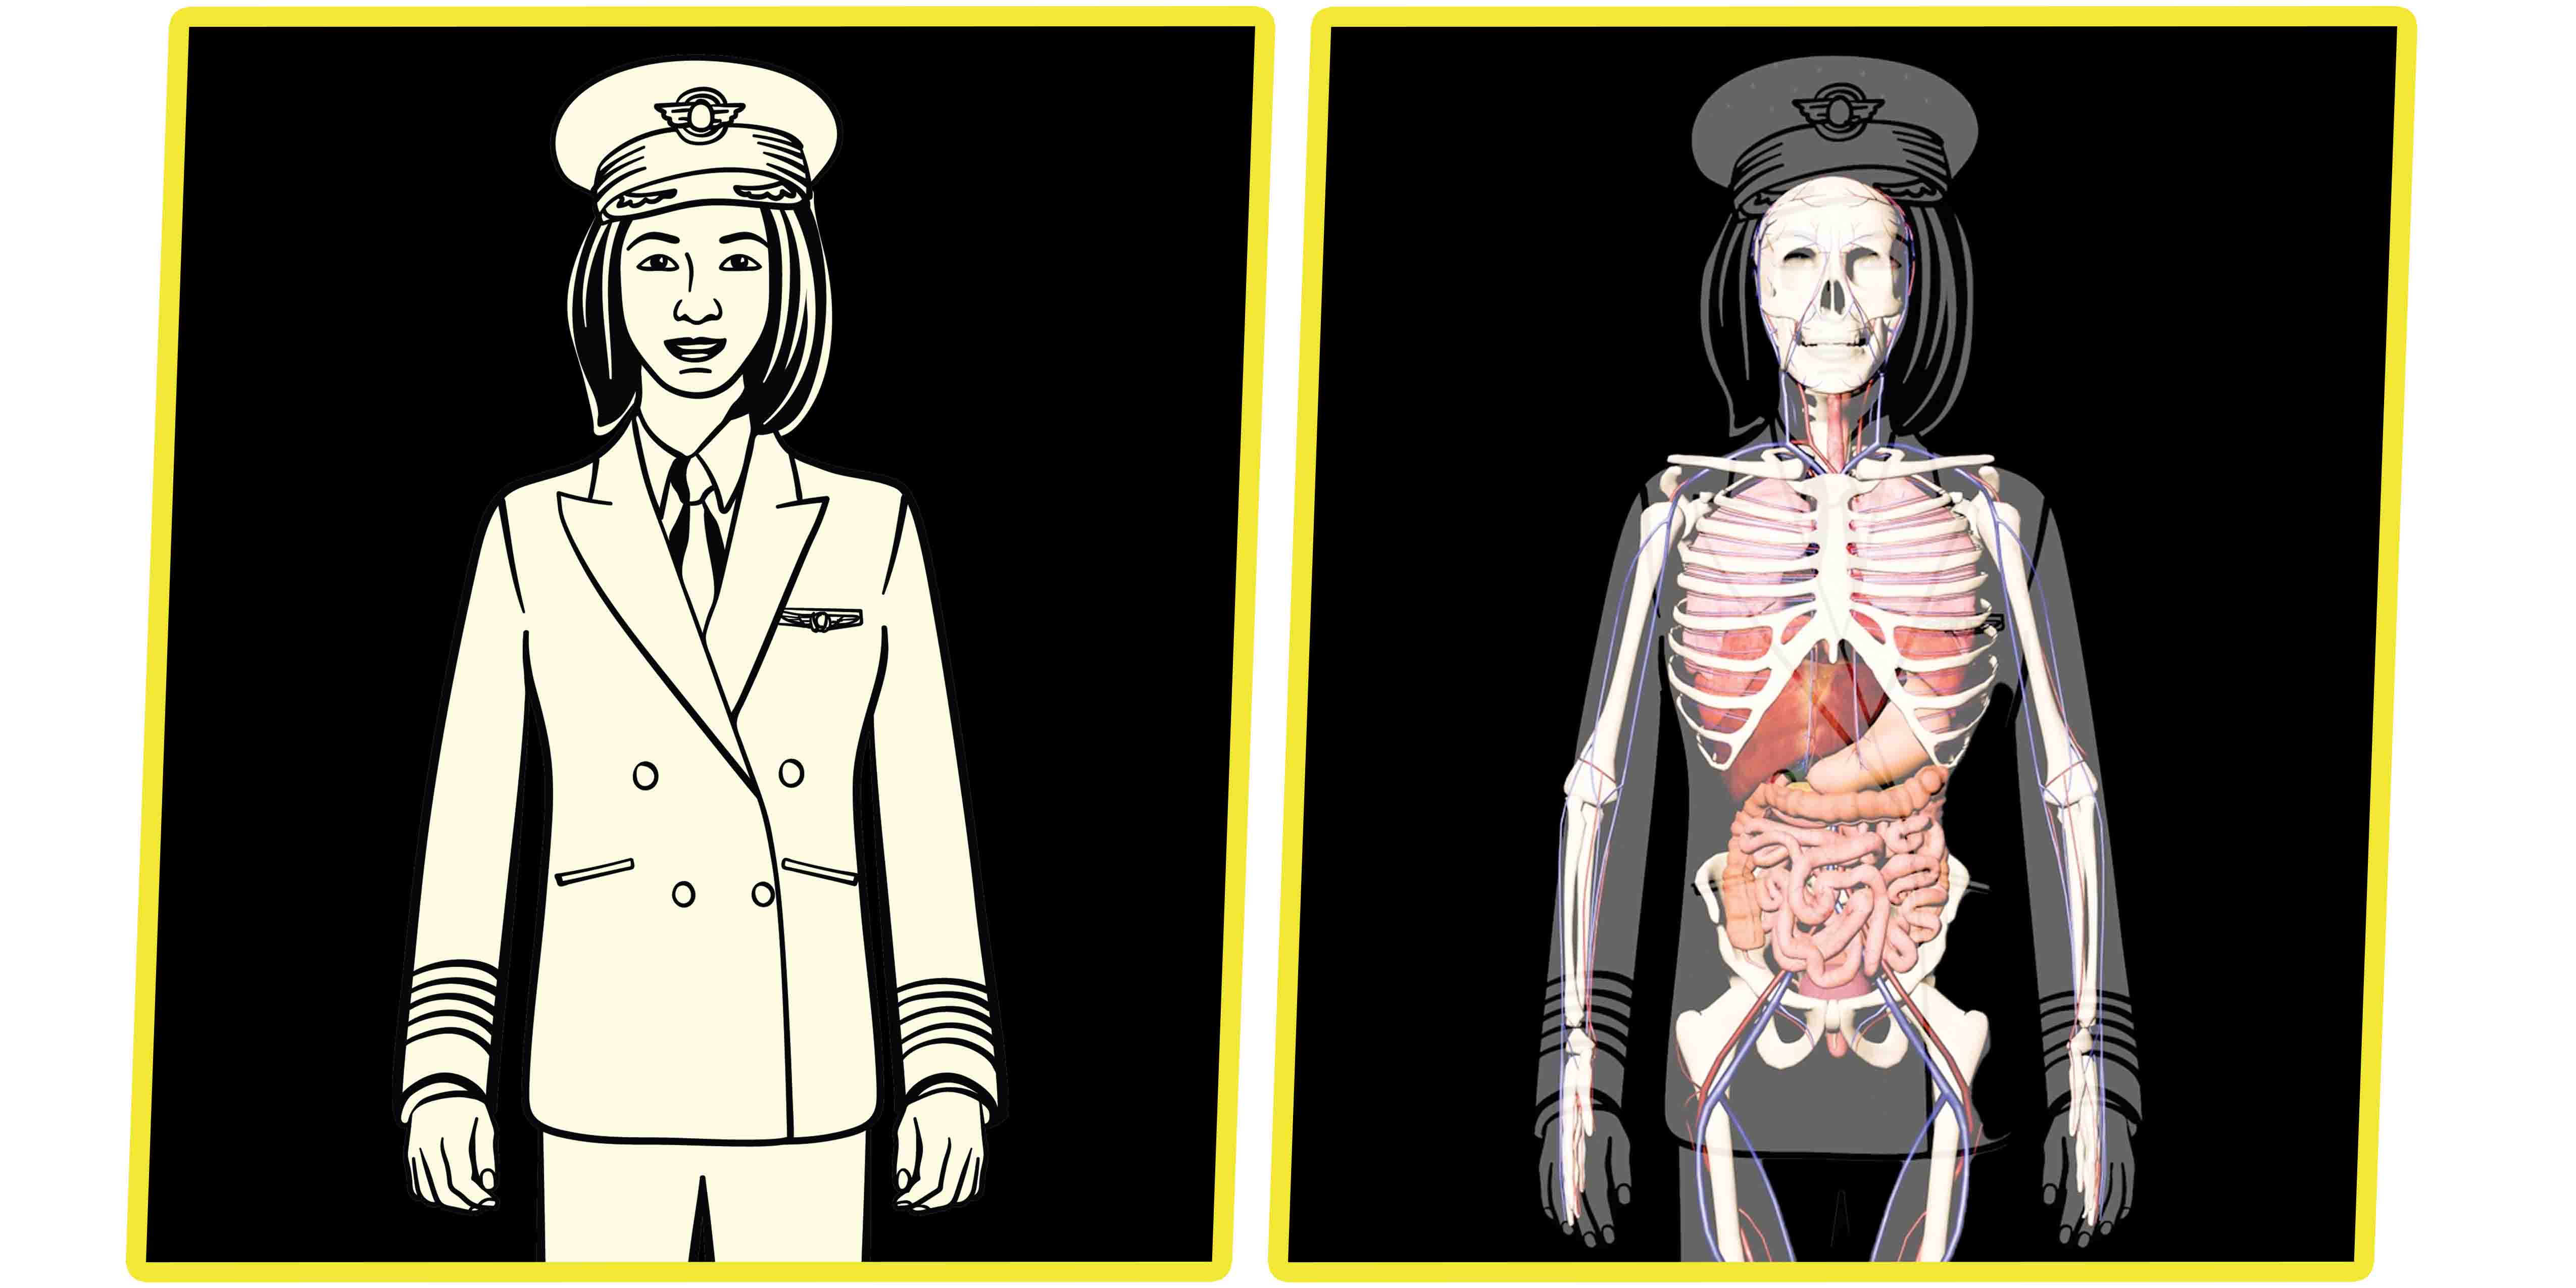 Figure representing Ari Fuji, superimposed over a skeleton to show how bodies are affected by flight.